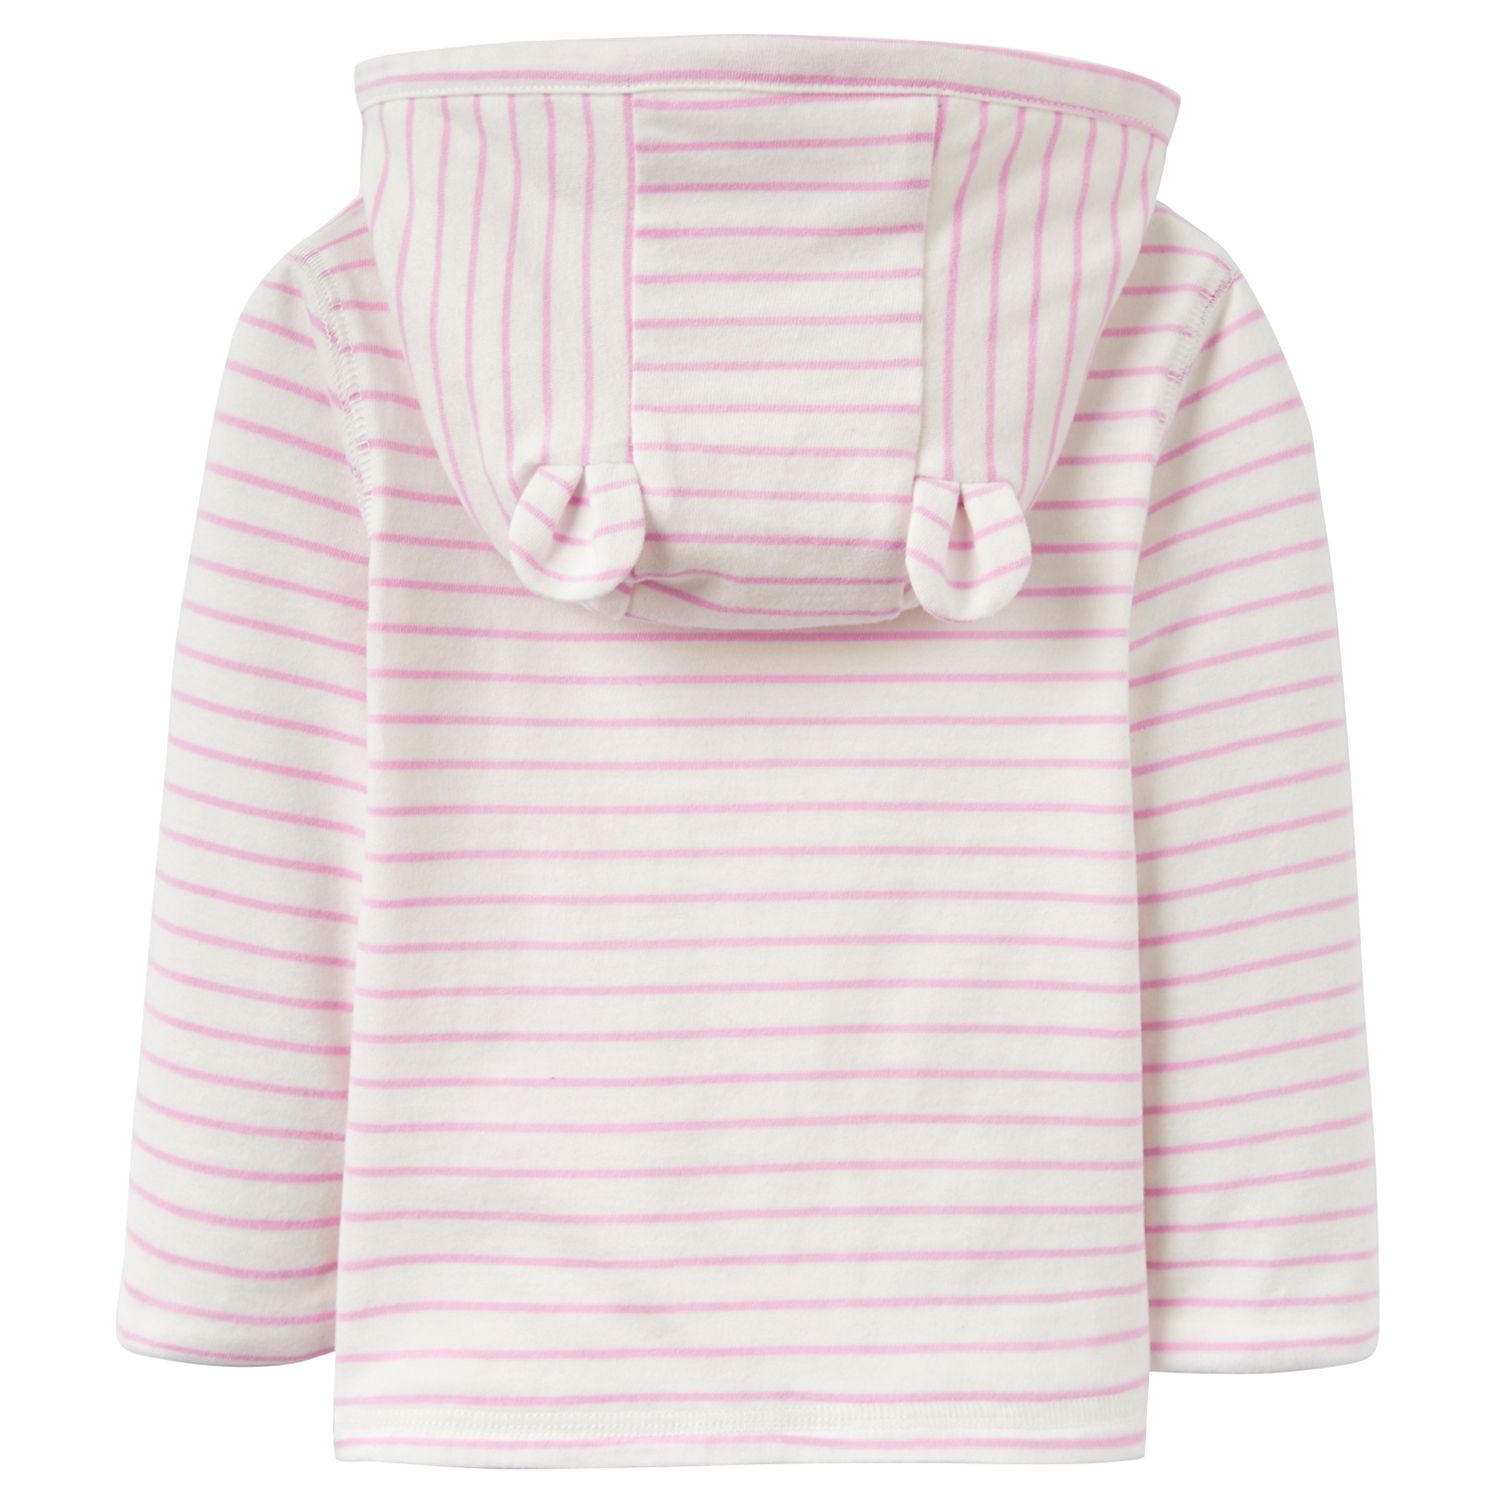 Baby Joule Cuddle Striped Jumper, Pink at John Lewis & Partners